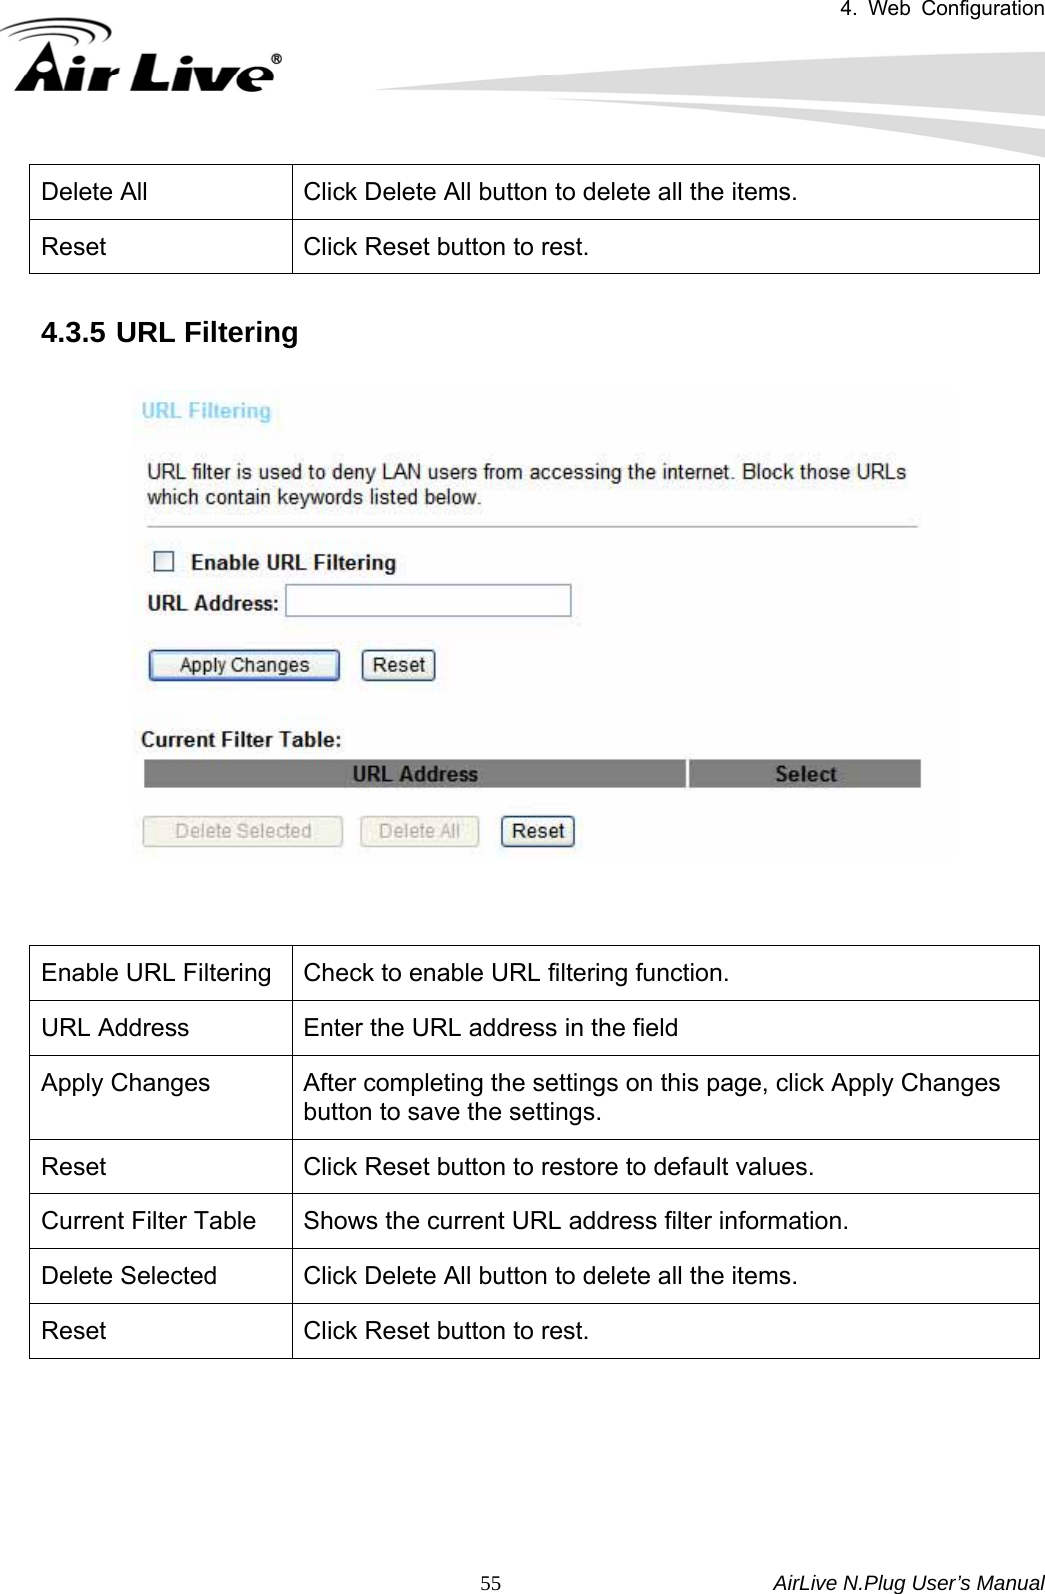 4. Web Configuration       AirLive N.Plug User’s Manual  55Delete All  Click Delete All button to delete all the items. Reset  Click Reset button to rest.  4.3.5 URL Filtering      Enable URL Filtering  Check to enable URL filtering function. URL Address  Enter the URL address in the field Apply Changes  After completing the settings on this page, click Apply Changes button to save the settings. Reset  Click Reset button to restore to default values. Current Filter Table  Shows the current URL address filter information. Delete Selected  Click Delete All button to delete all the items. Reset  Click Reset button to rest.  